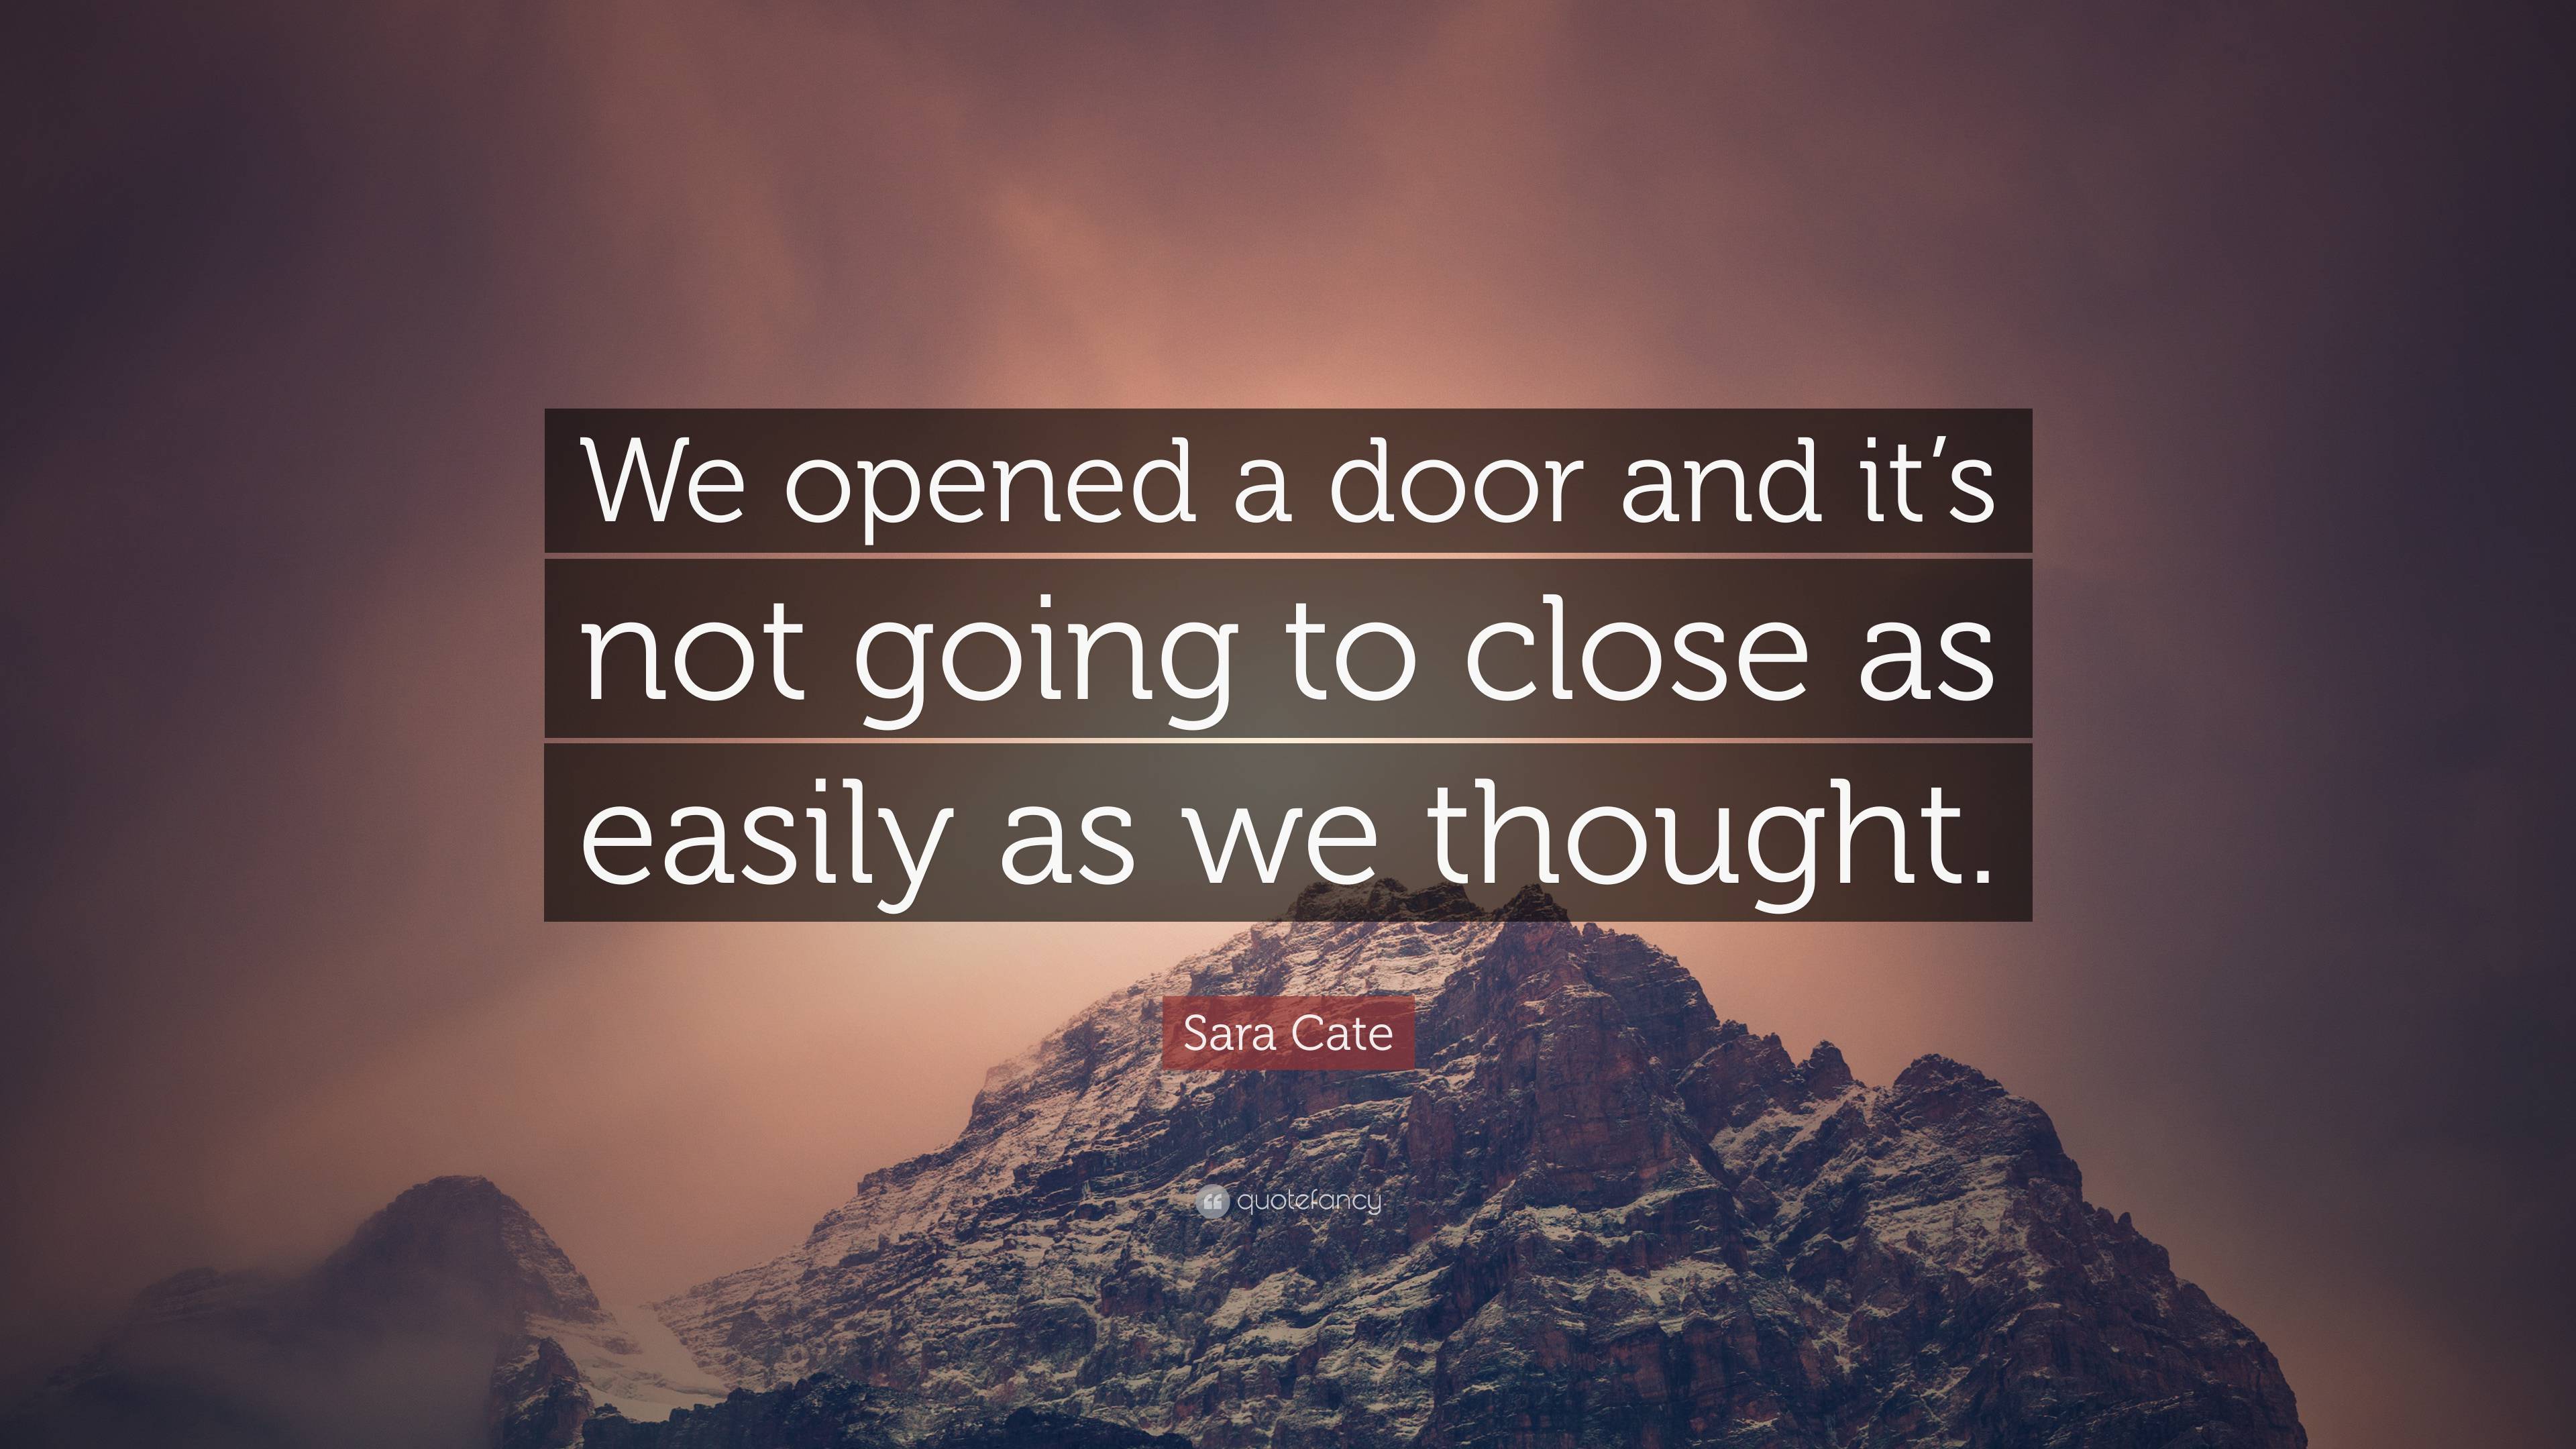 Sara Cate Quote: “We opened a door and it’s not going to close as ...